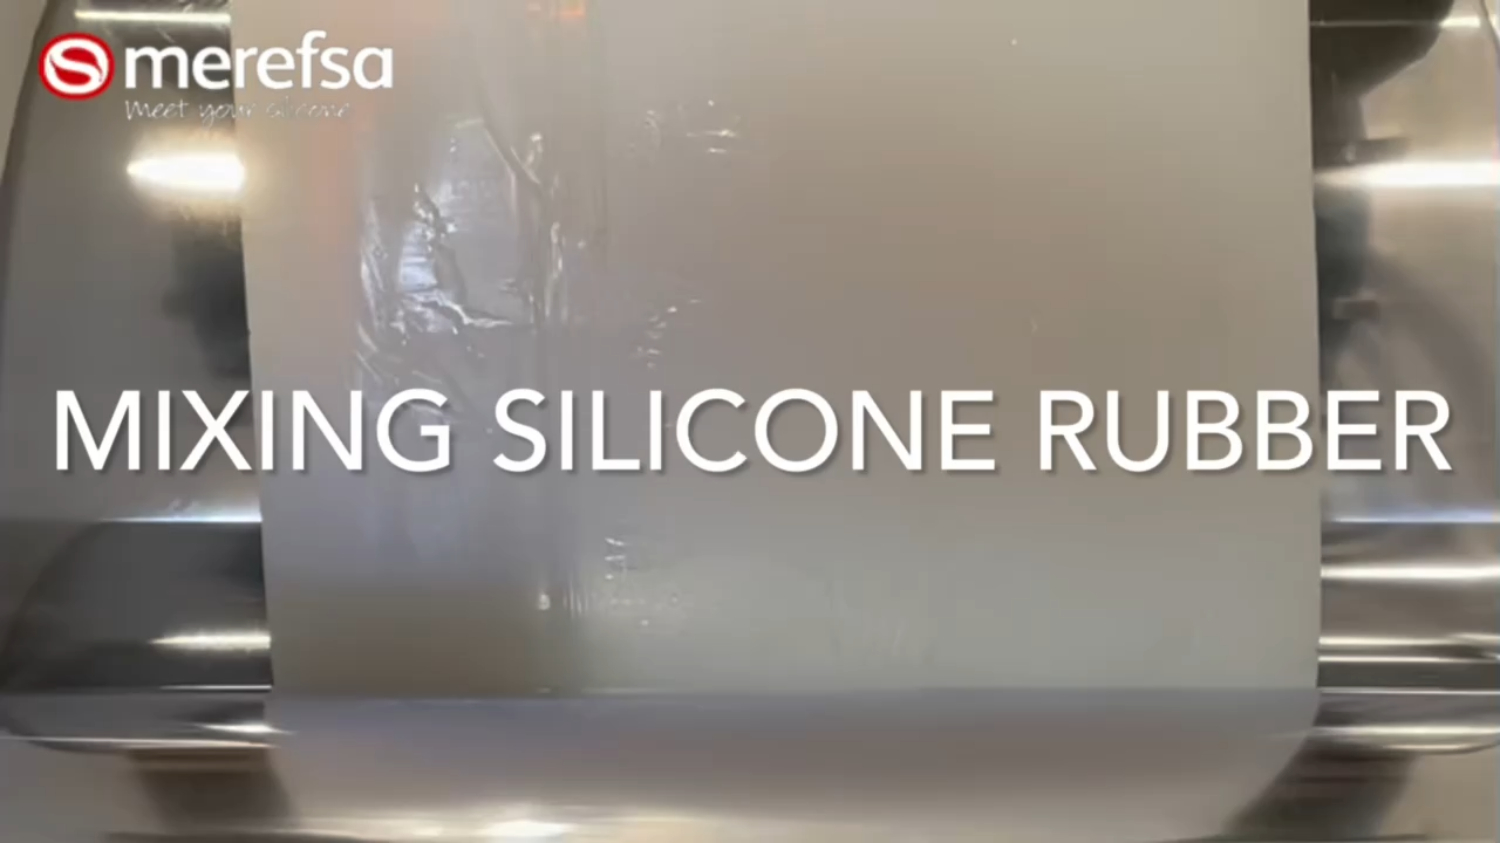 Mixing Silicone Rubber process Merefsa